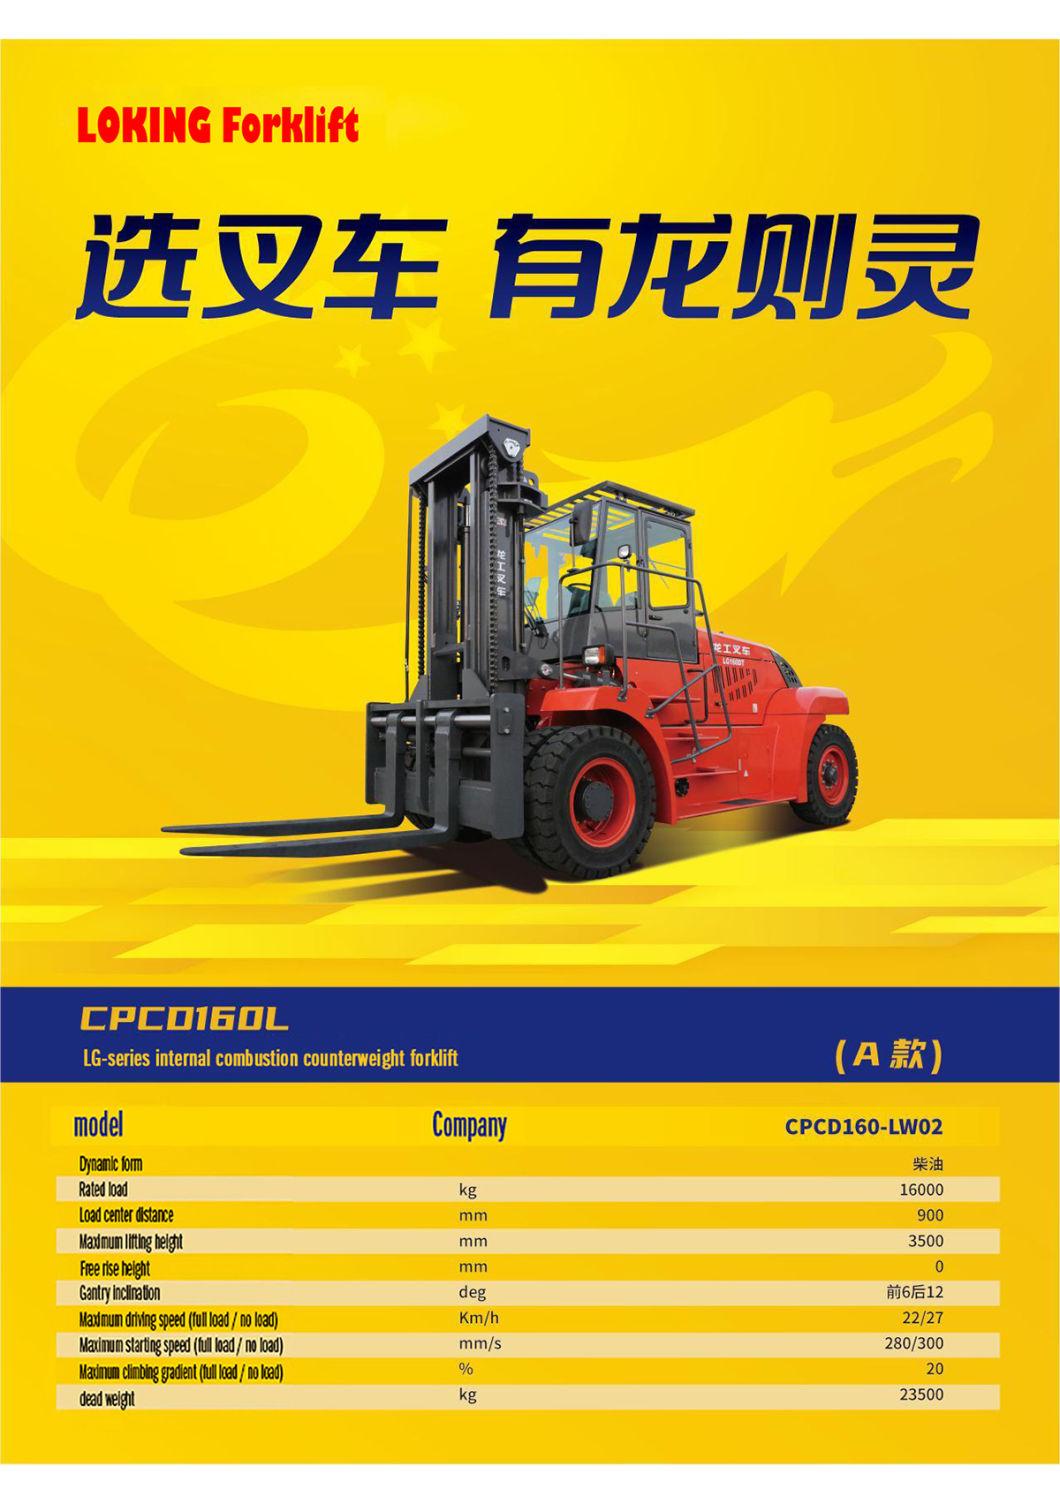 Cheap Price 16 Ton Diesel Forklift with Turbocharging and High Power